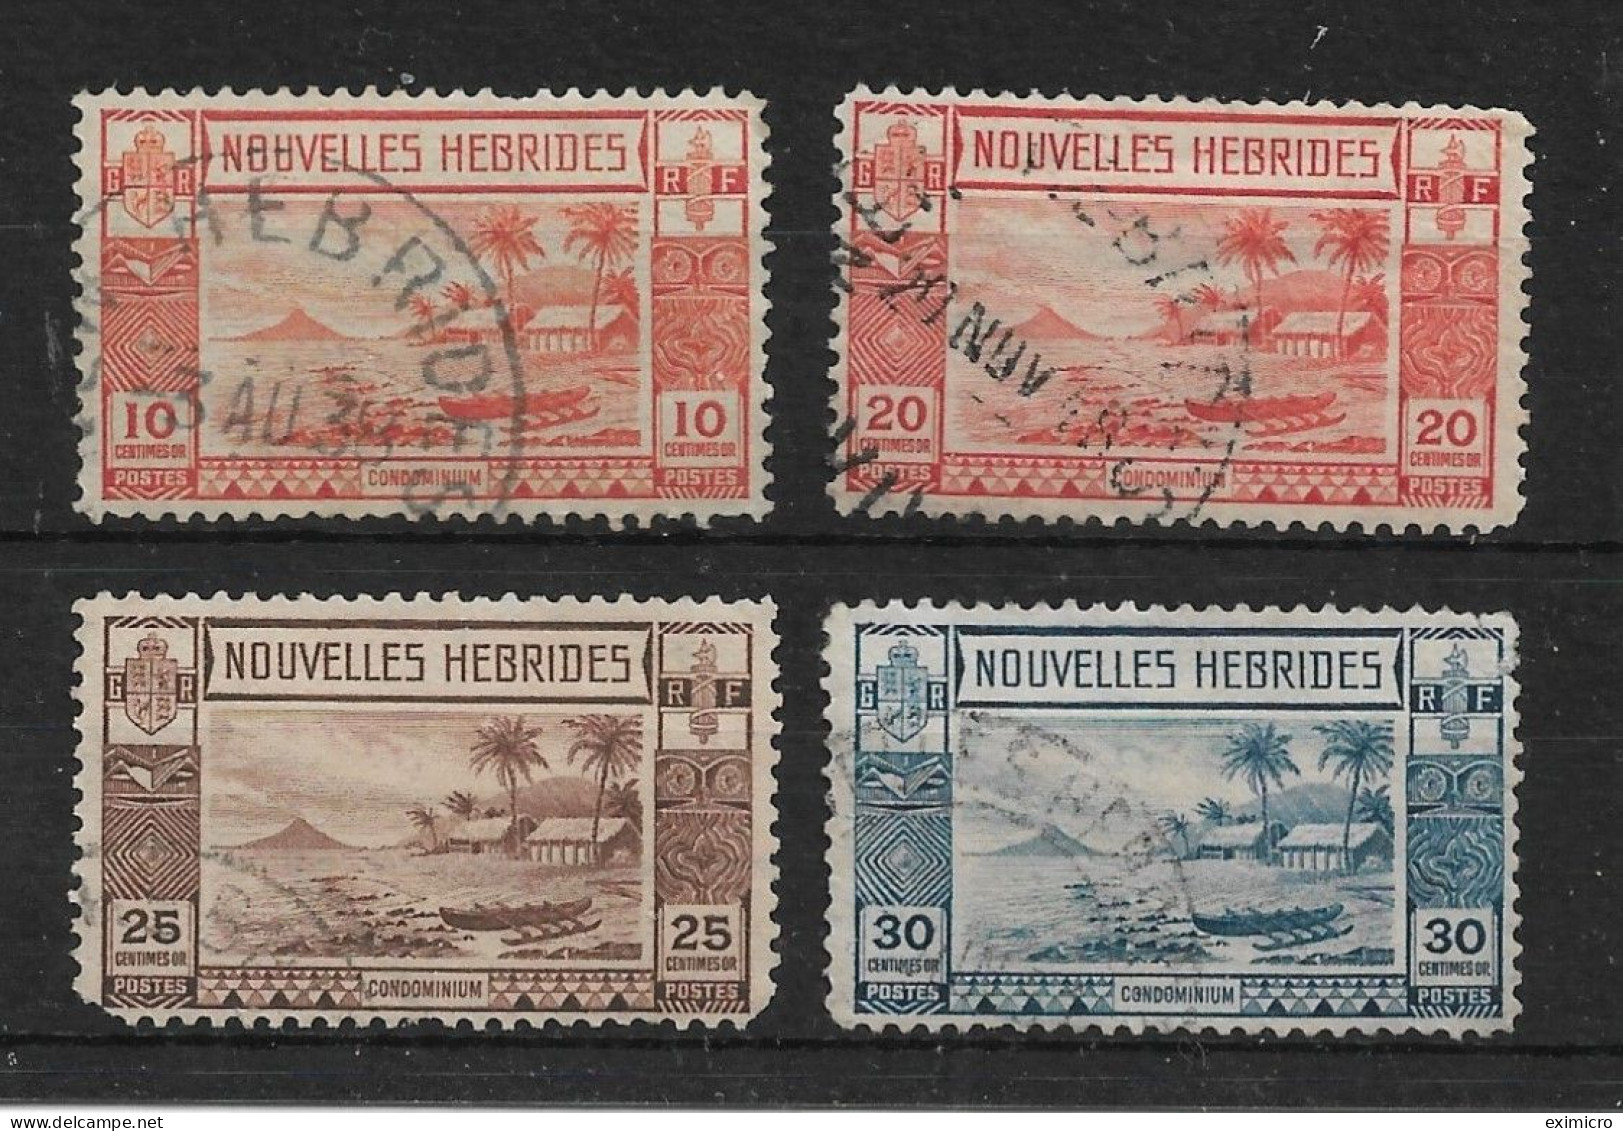 NEW HEBRIDES (FRENCH CURRENCY) 1938 10c, 20c, 25c, 30c SG F54, F56, F57, F58 FINE USED Cat £26 - Gebraucht